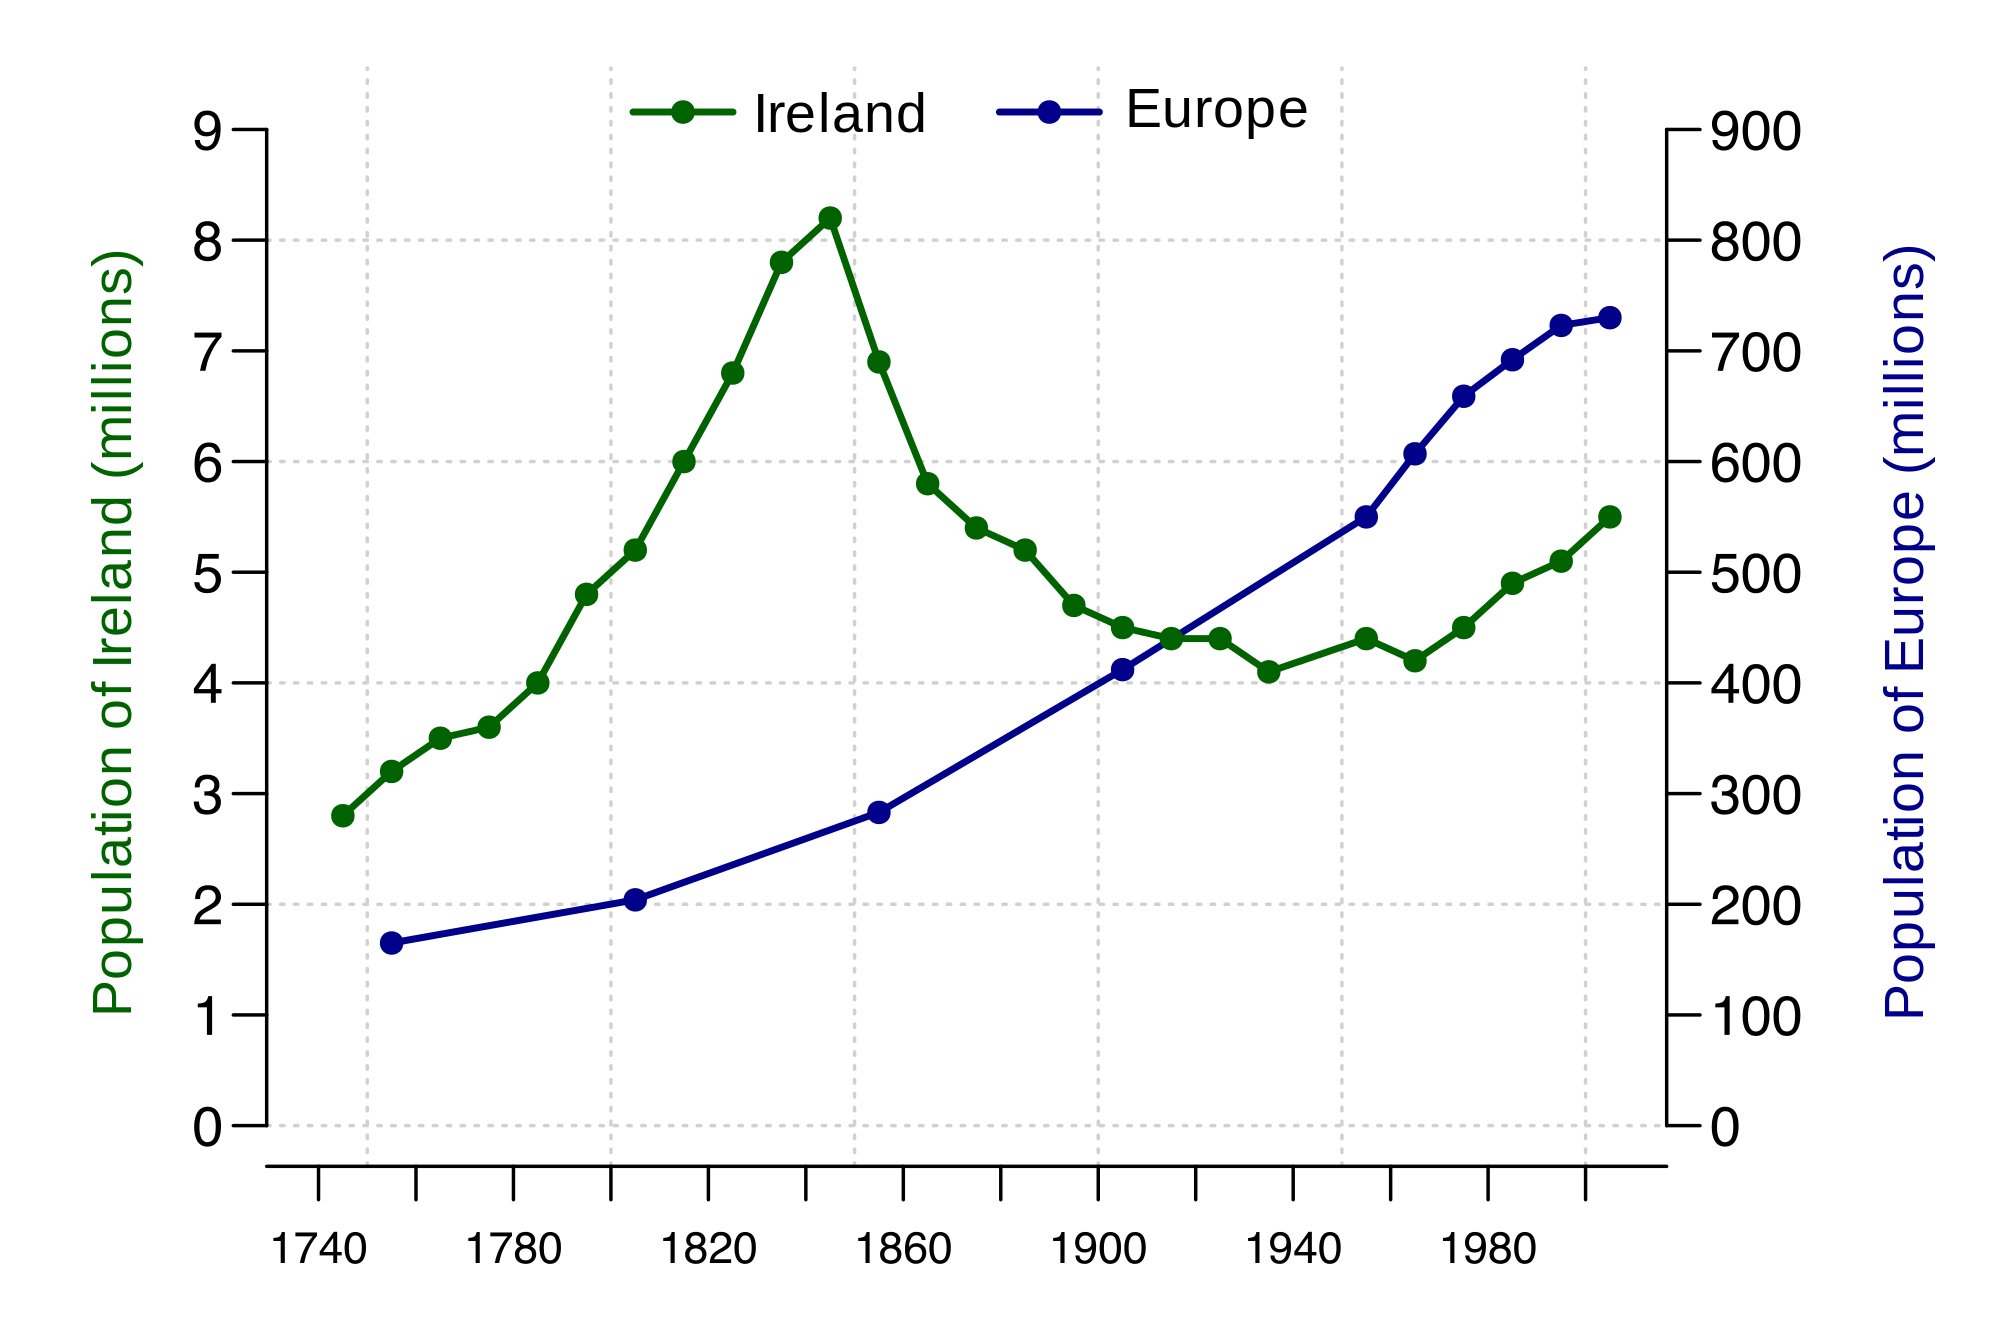 D3 Time Series Line Chart